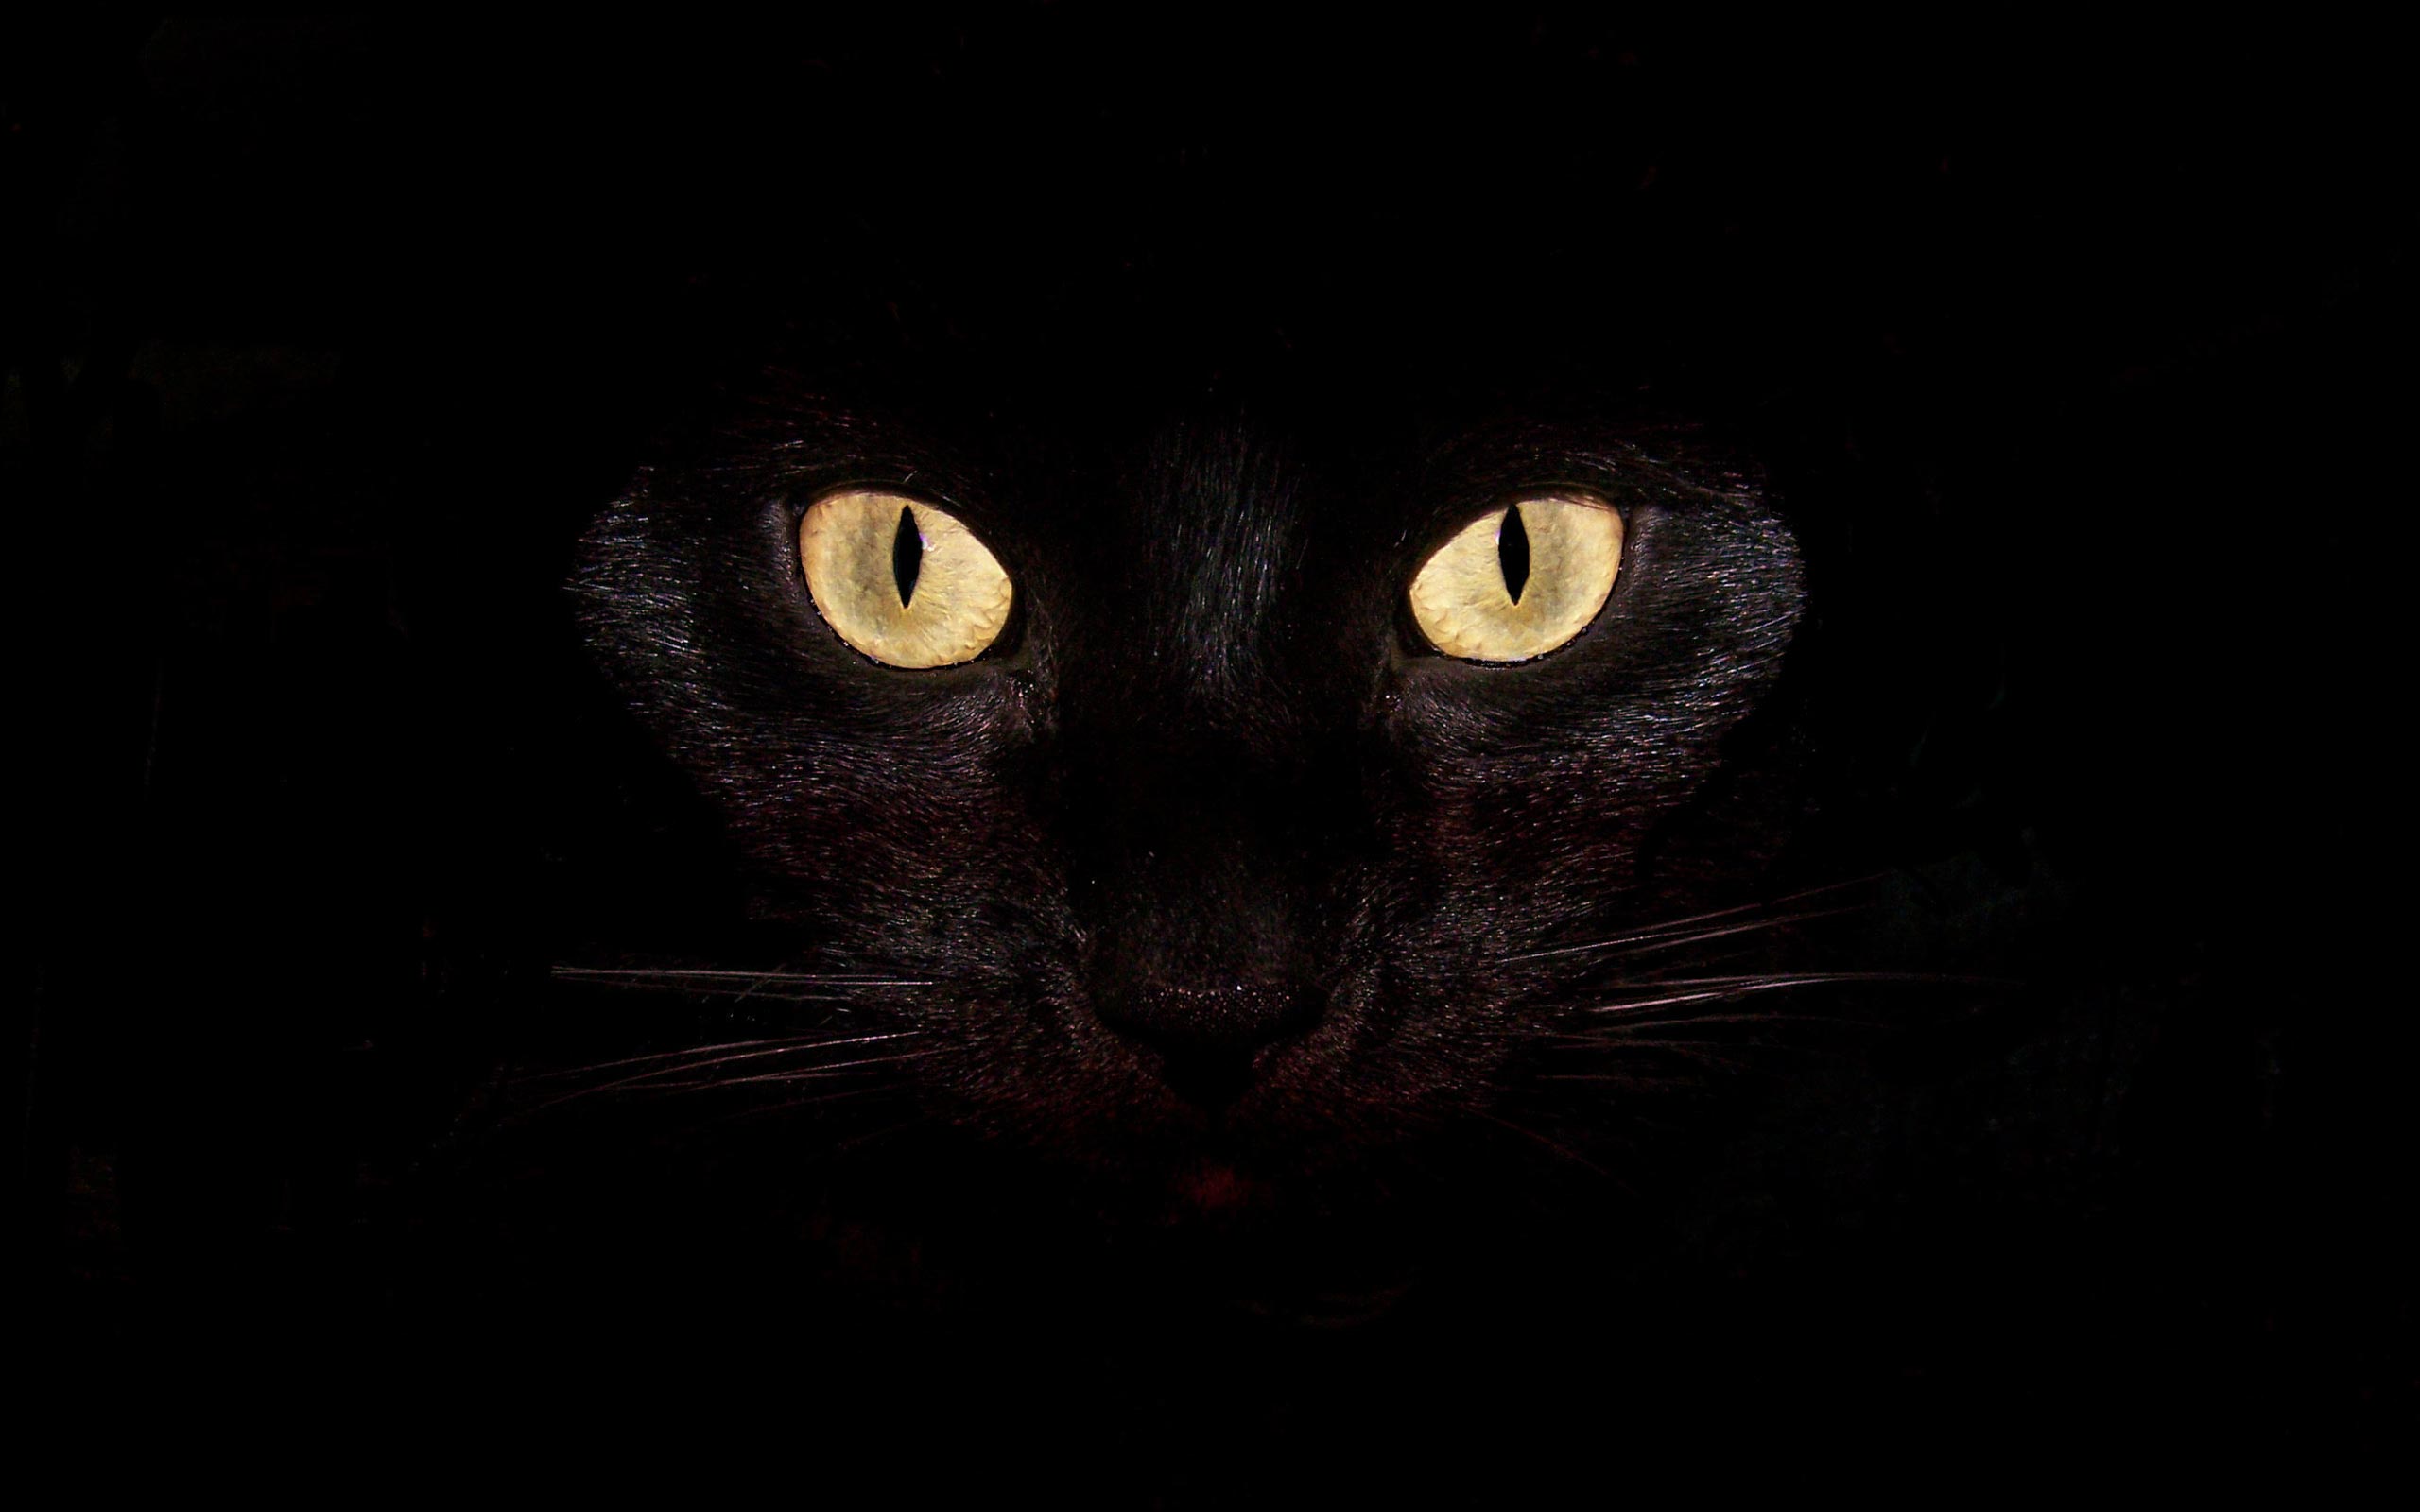 Abstract Black cat backgrounds Wallpaper in high resolution for free